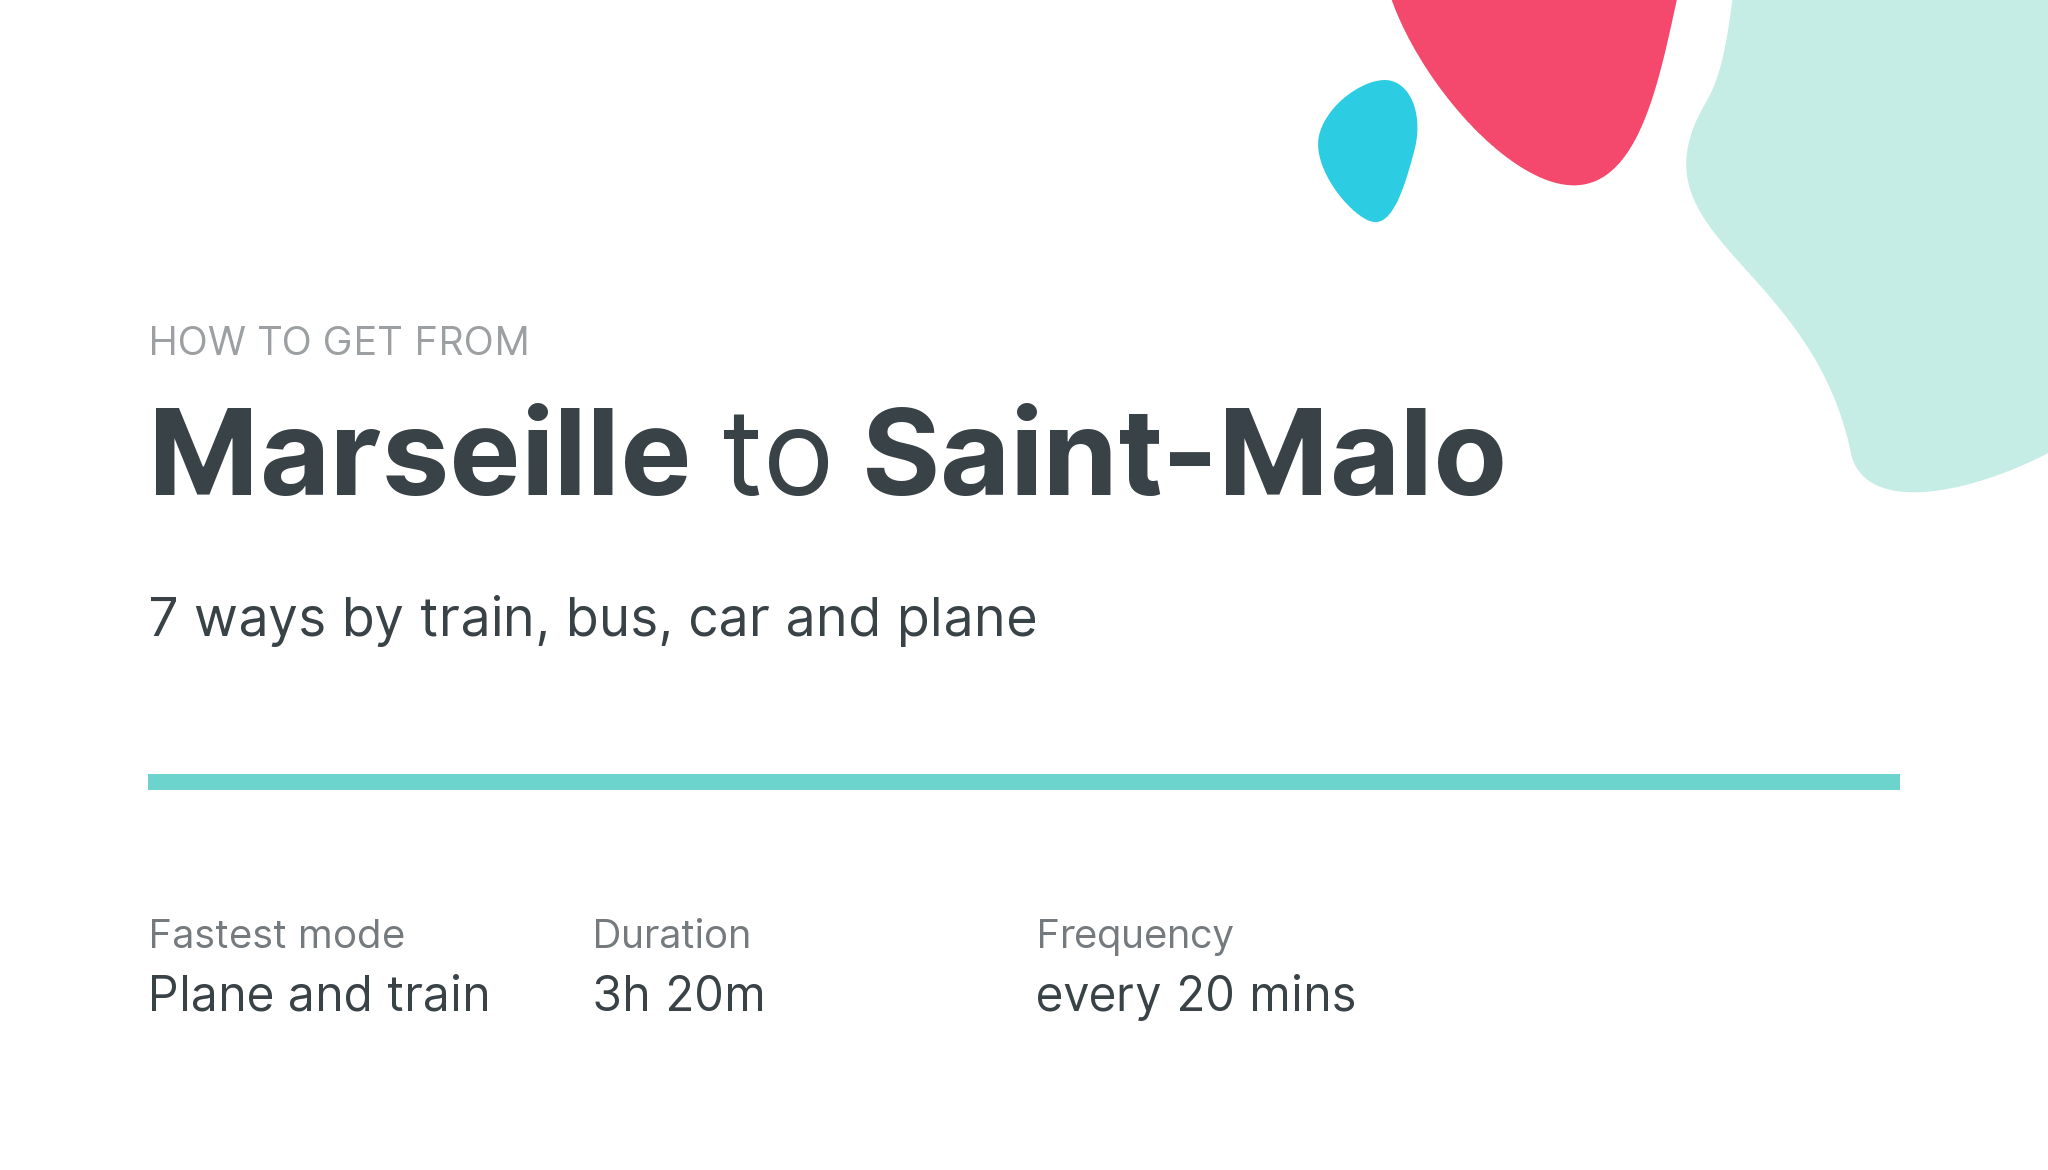 How do I get from Marseille to Saint-Malo